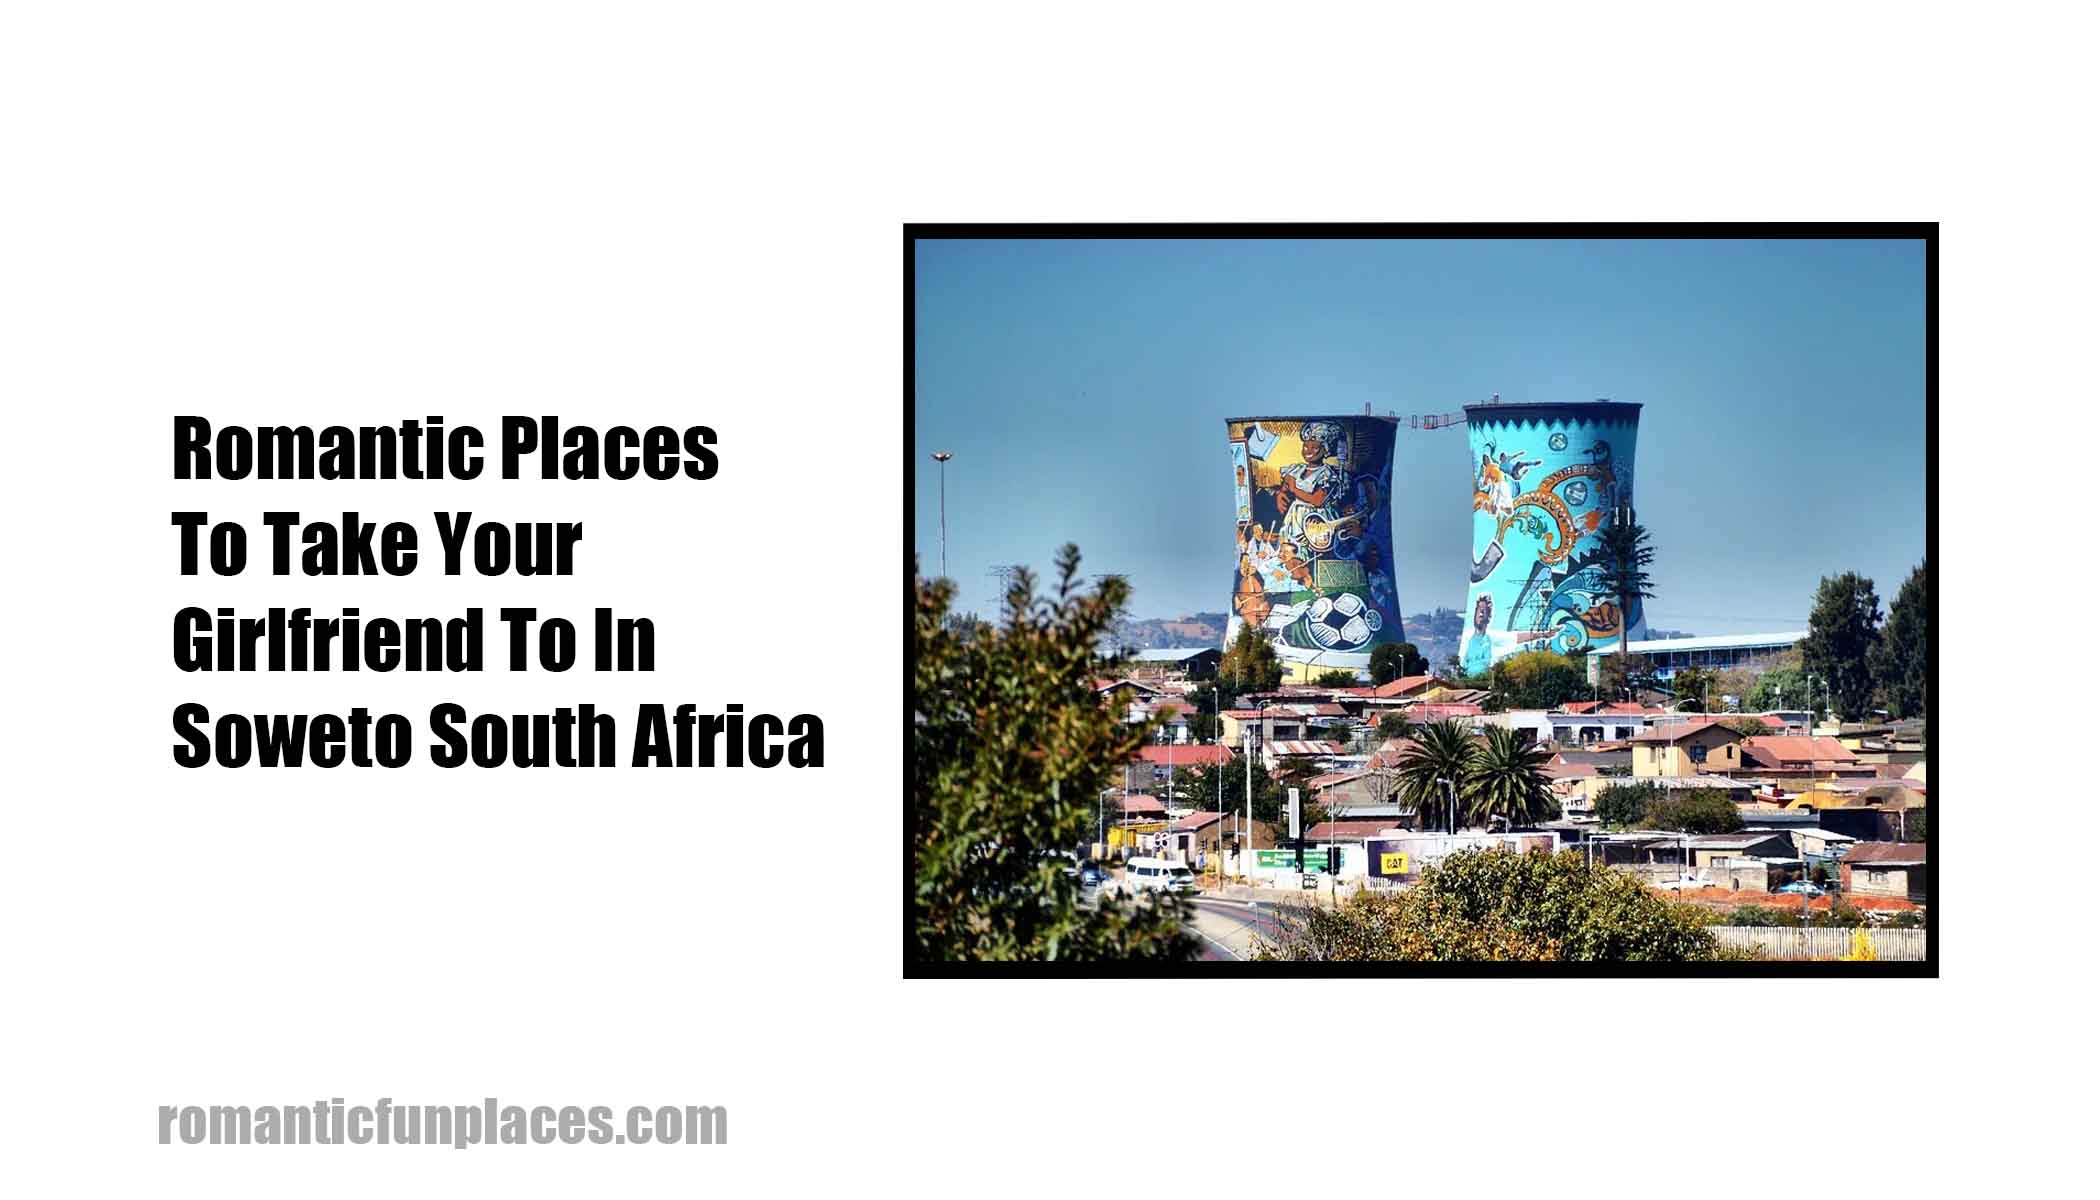 Romantic Places To Take Your Girlfriend To In Soweto South Africa